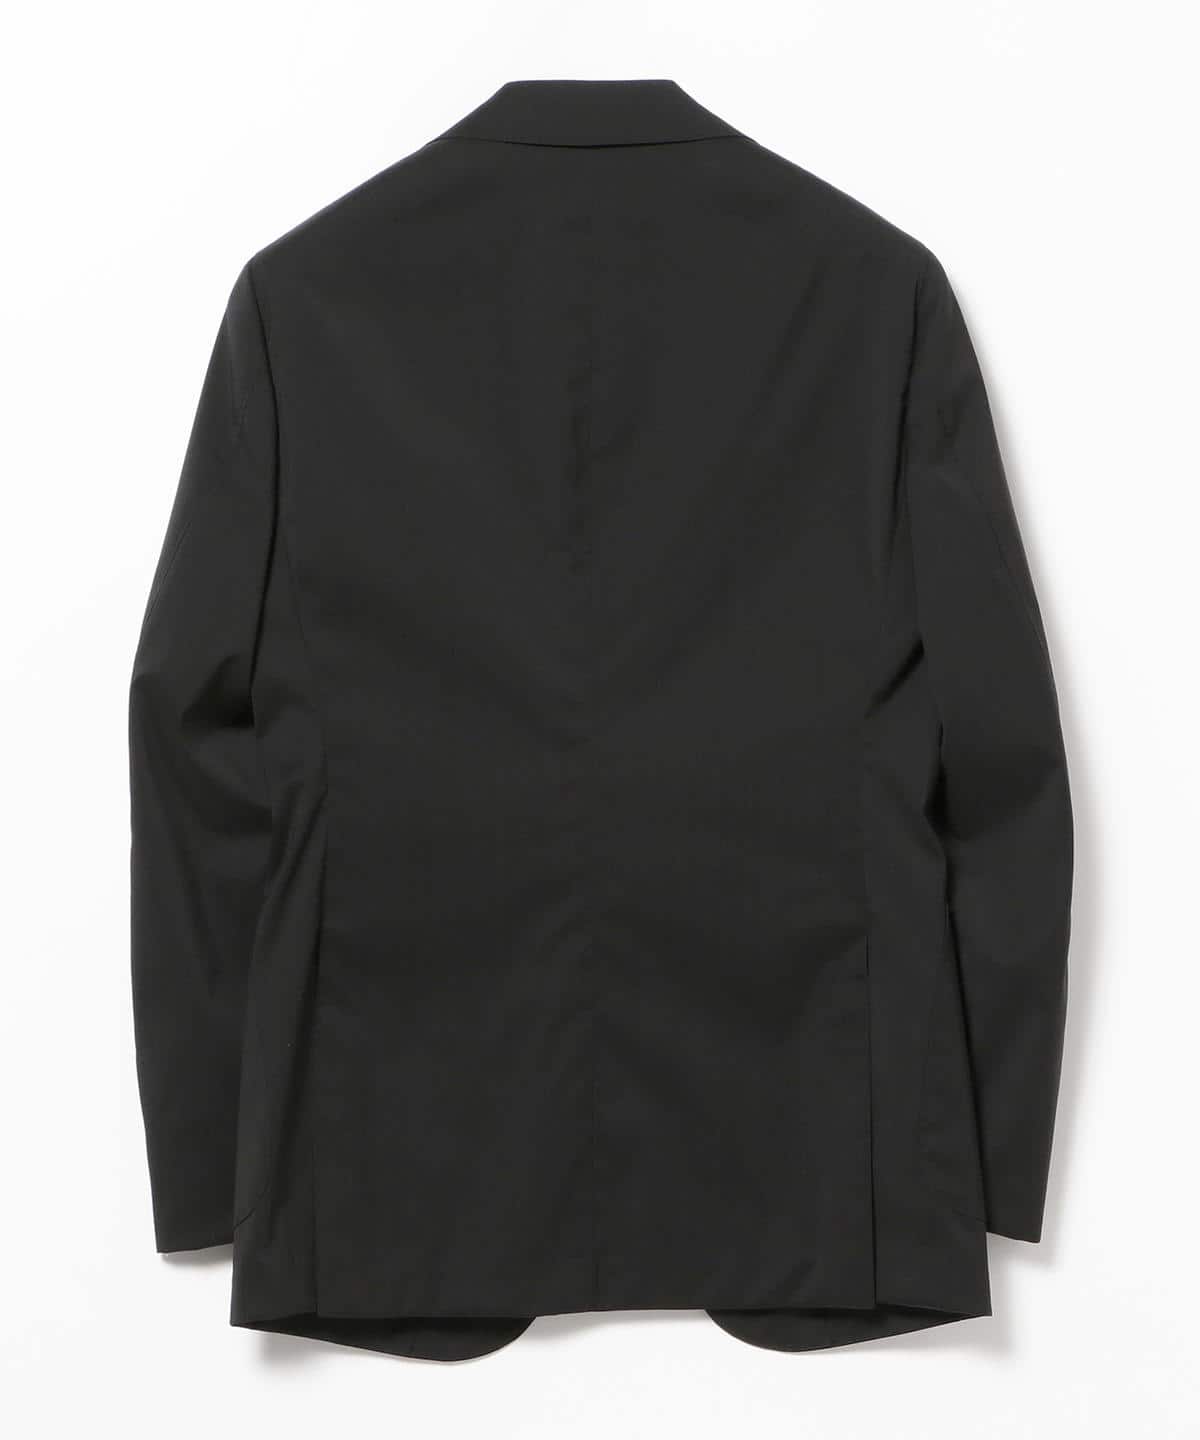 [Outlet] BEAMS F / SOLOTEX(R) EASY wool jacket